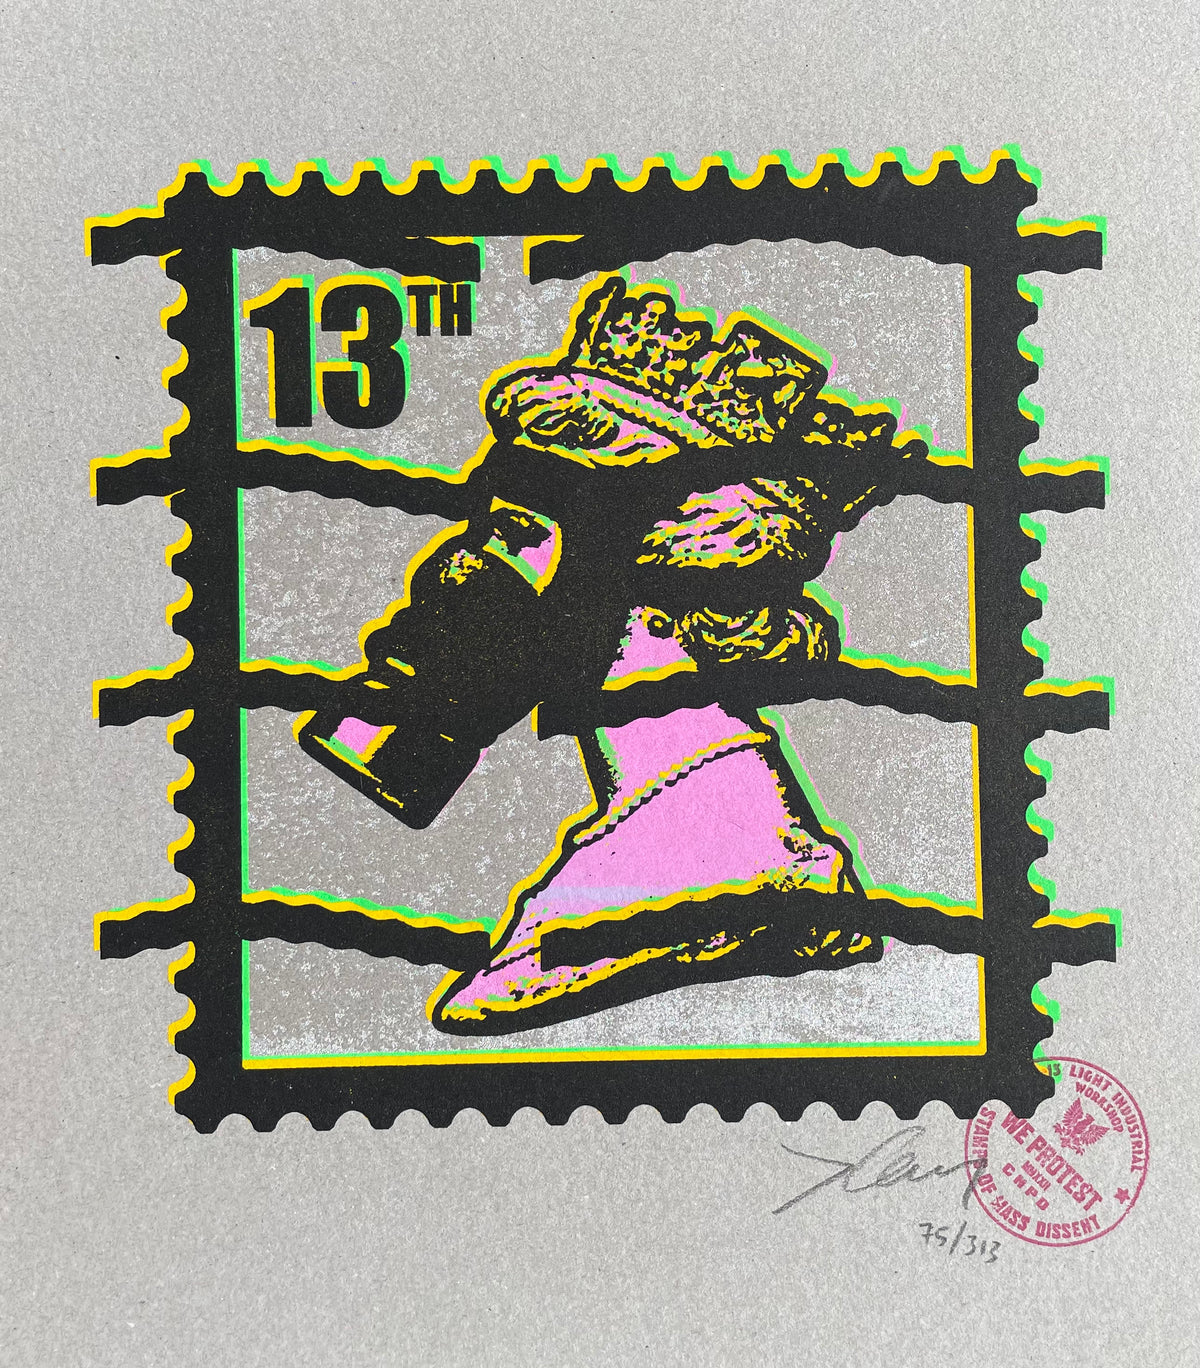 Stamps of Mass Dissent 13th Class